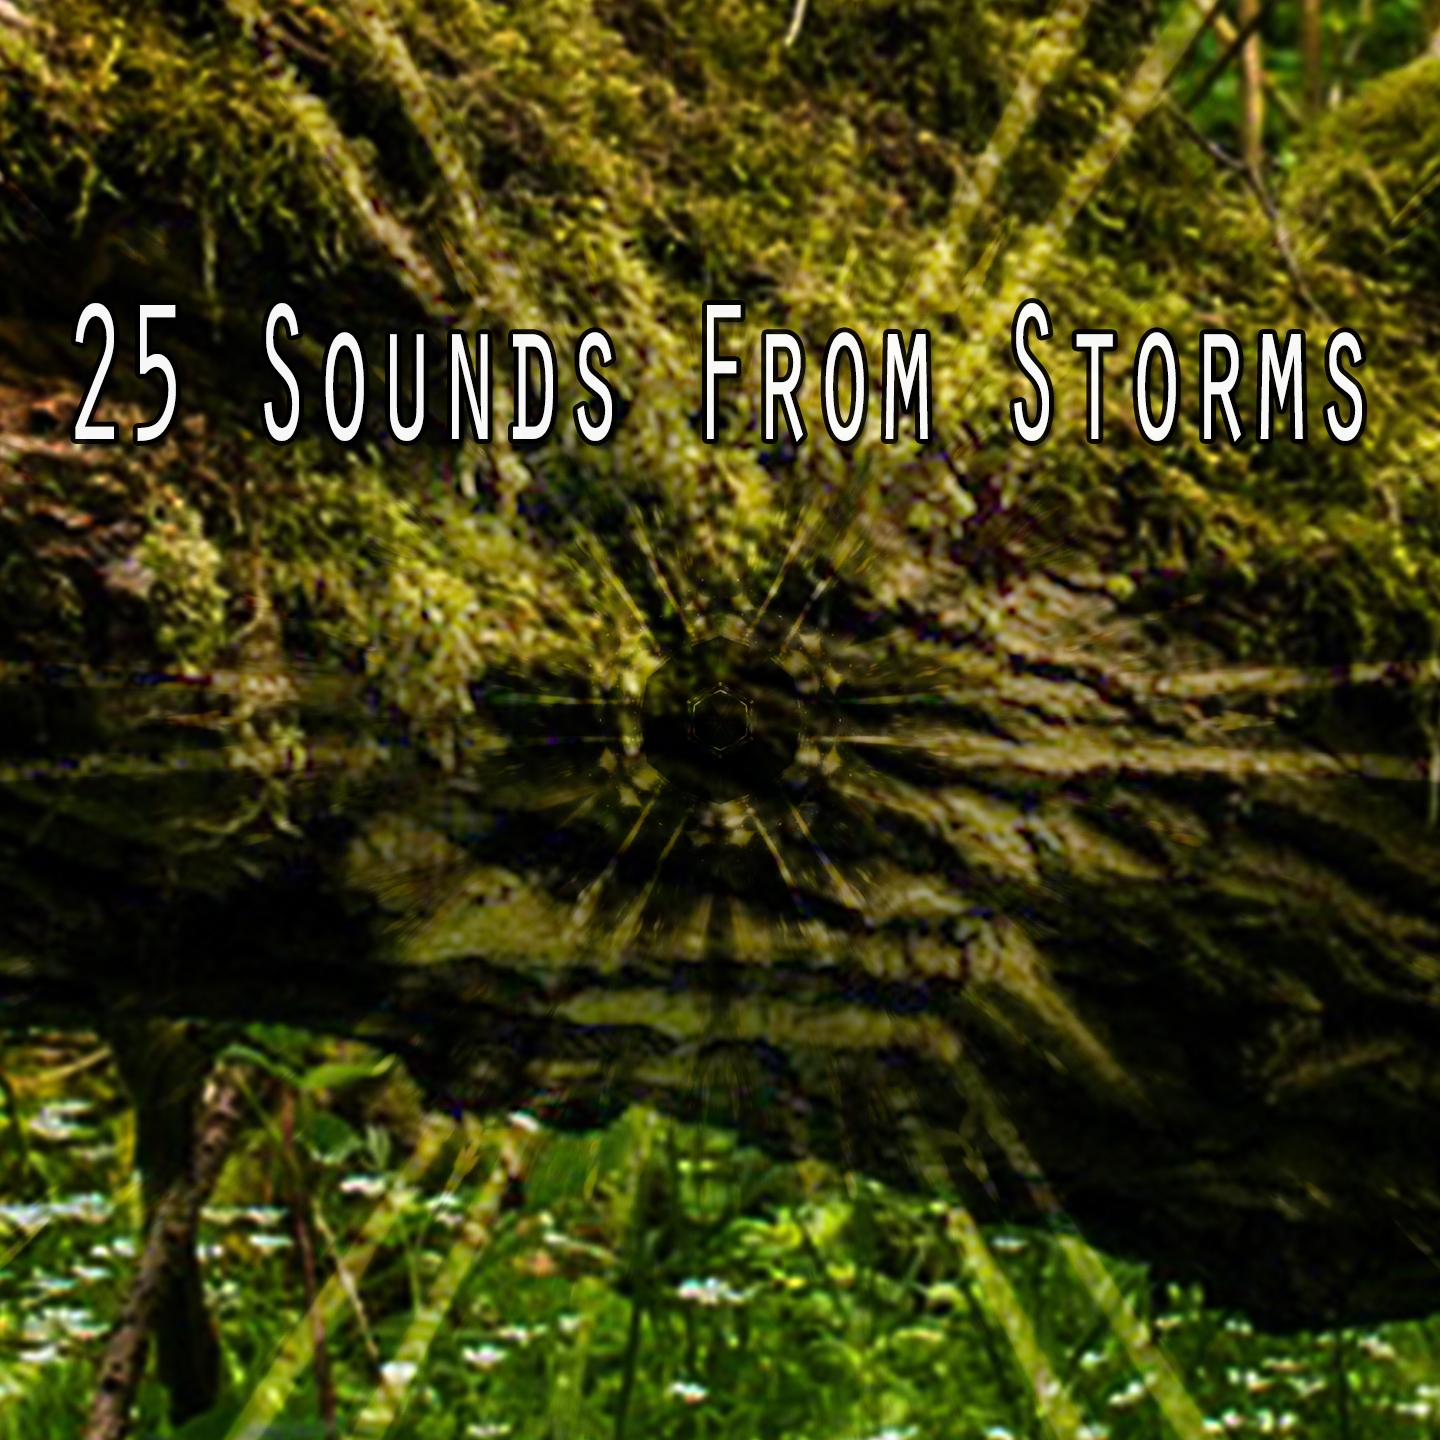 25 Sounds From Storms